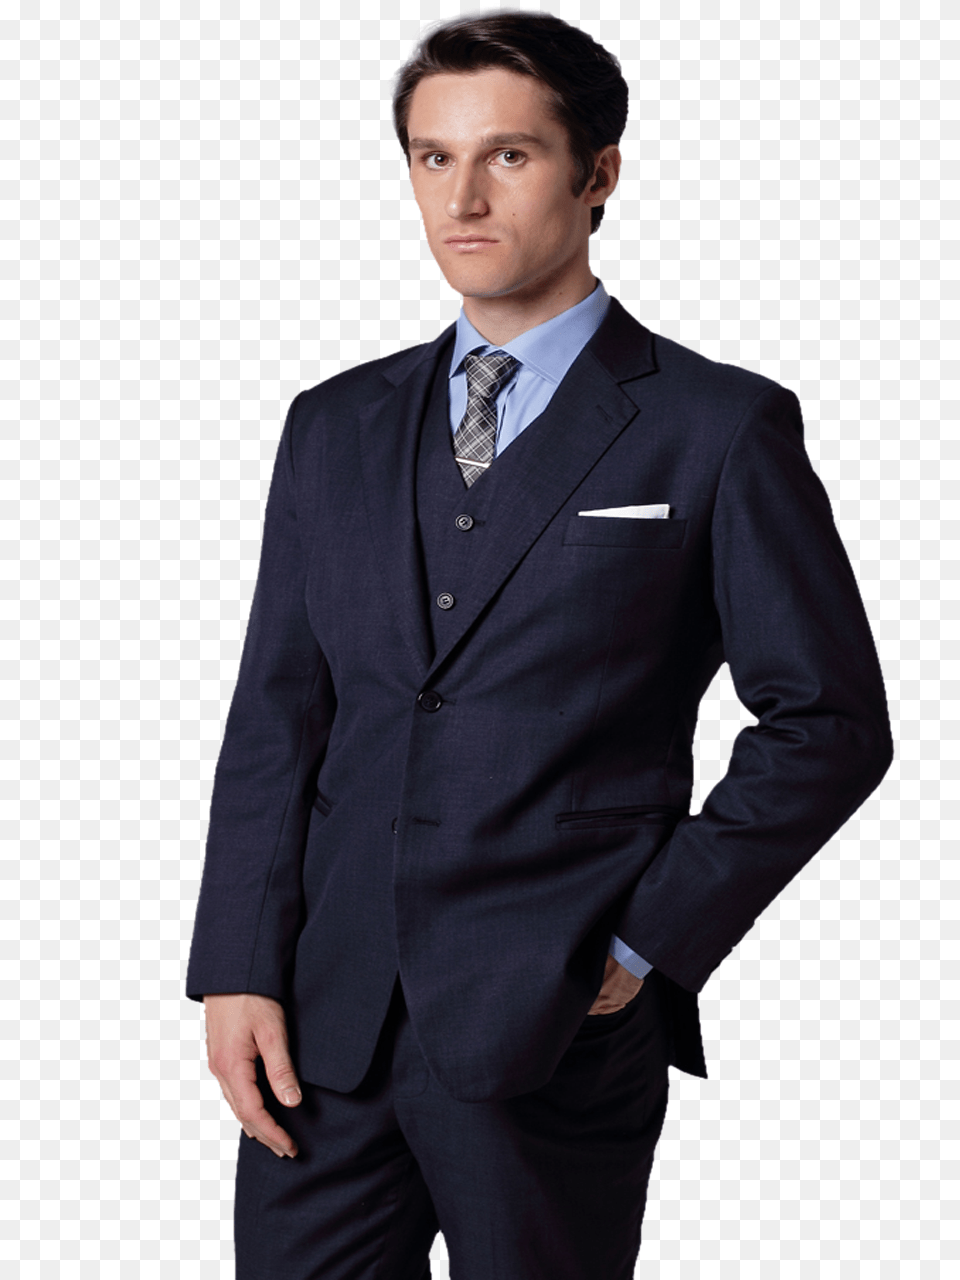 Groom, Tuxedo, Suit, Clothing, Formal Wear Png